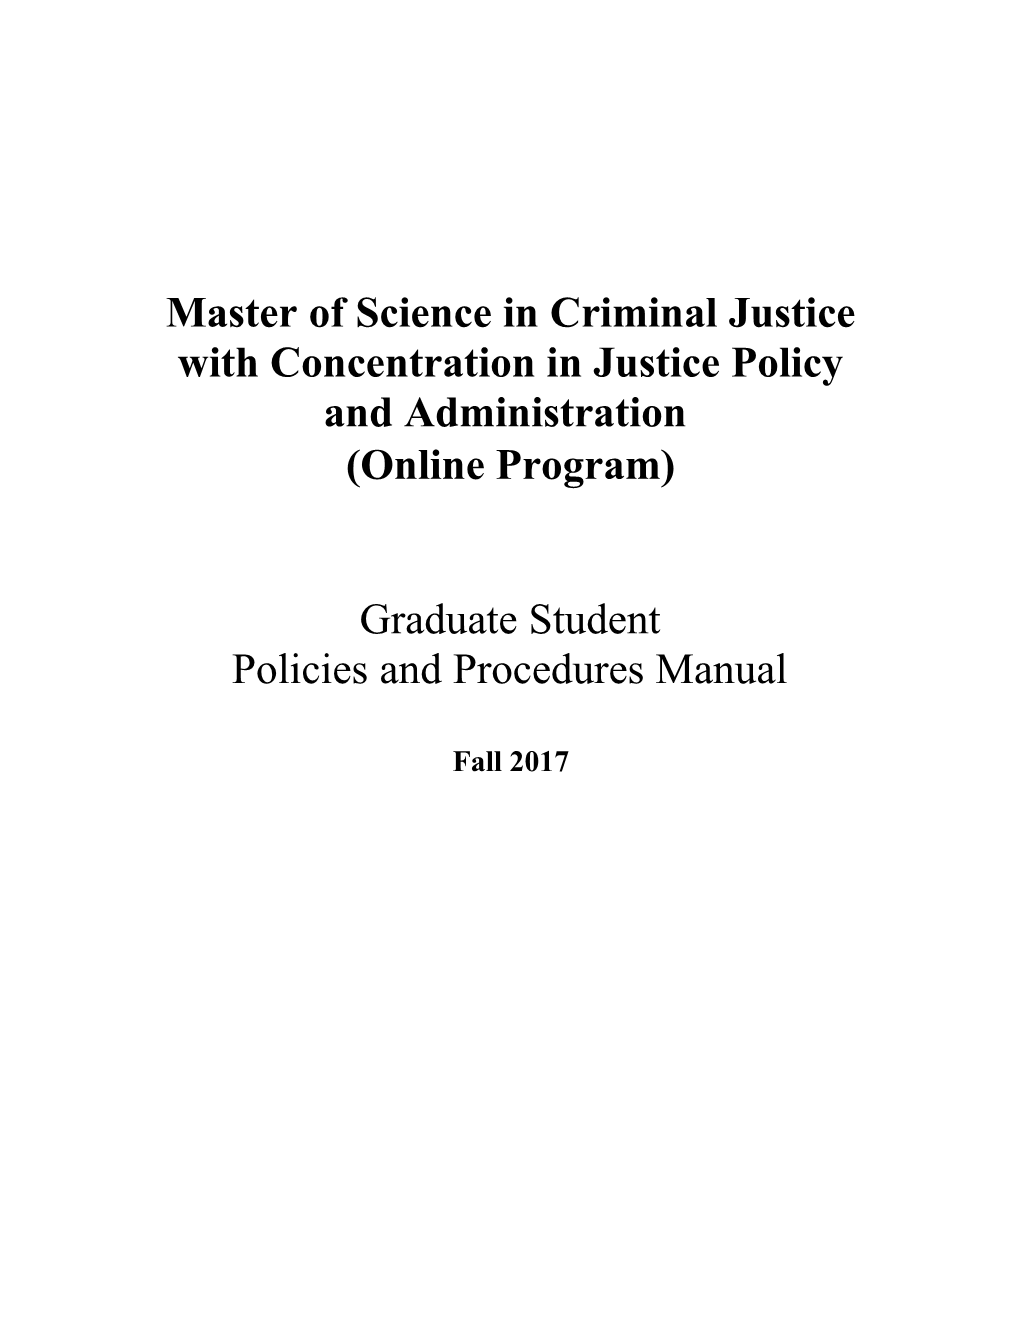 Masterof Scienceincriminaljusticewith Concentration in Justice Policy and Administration